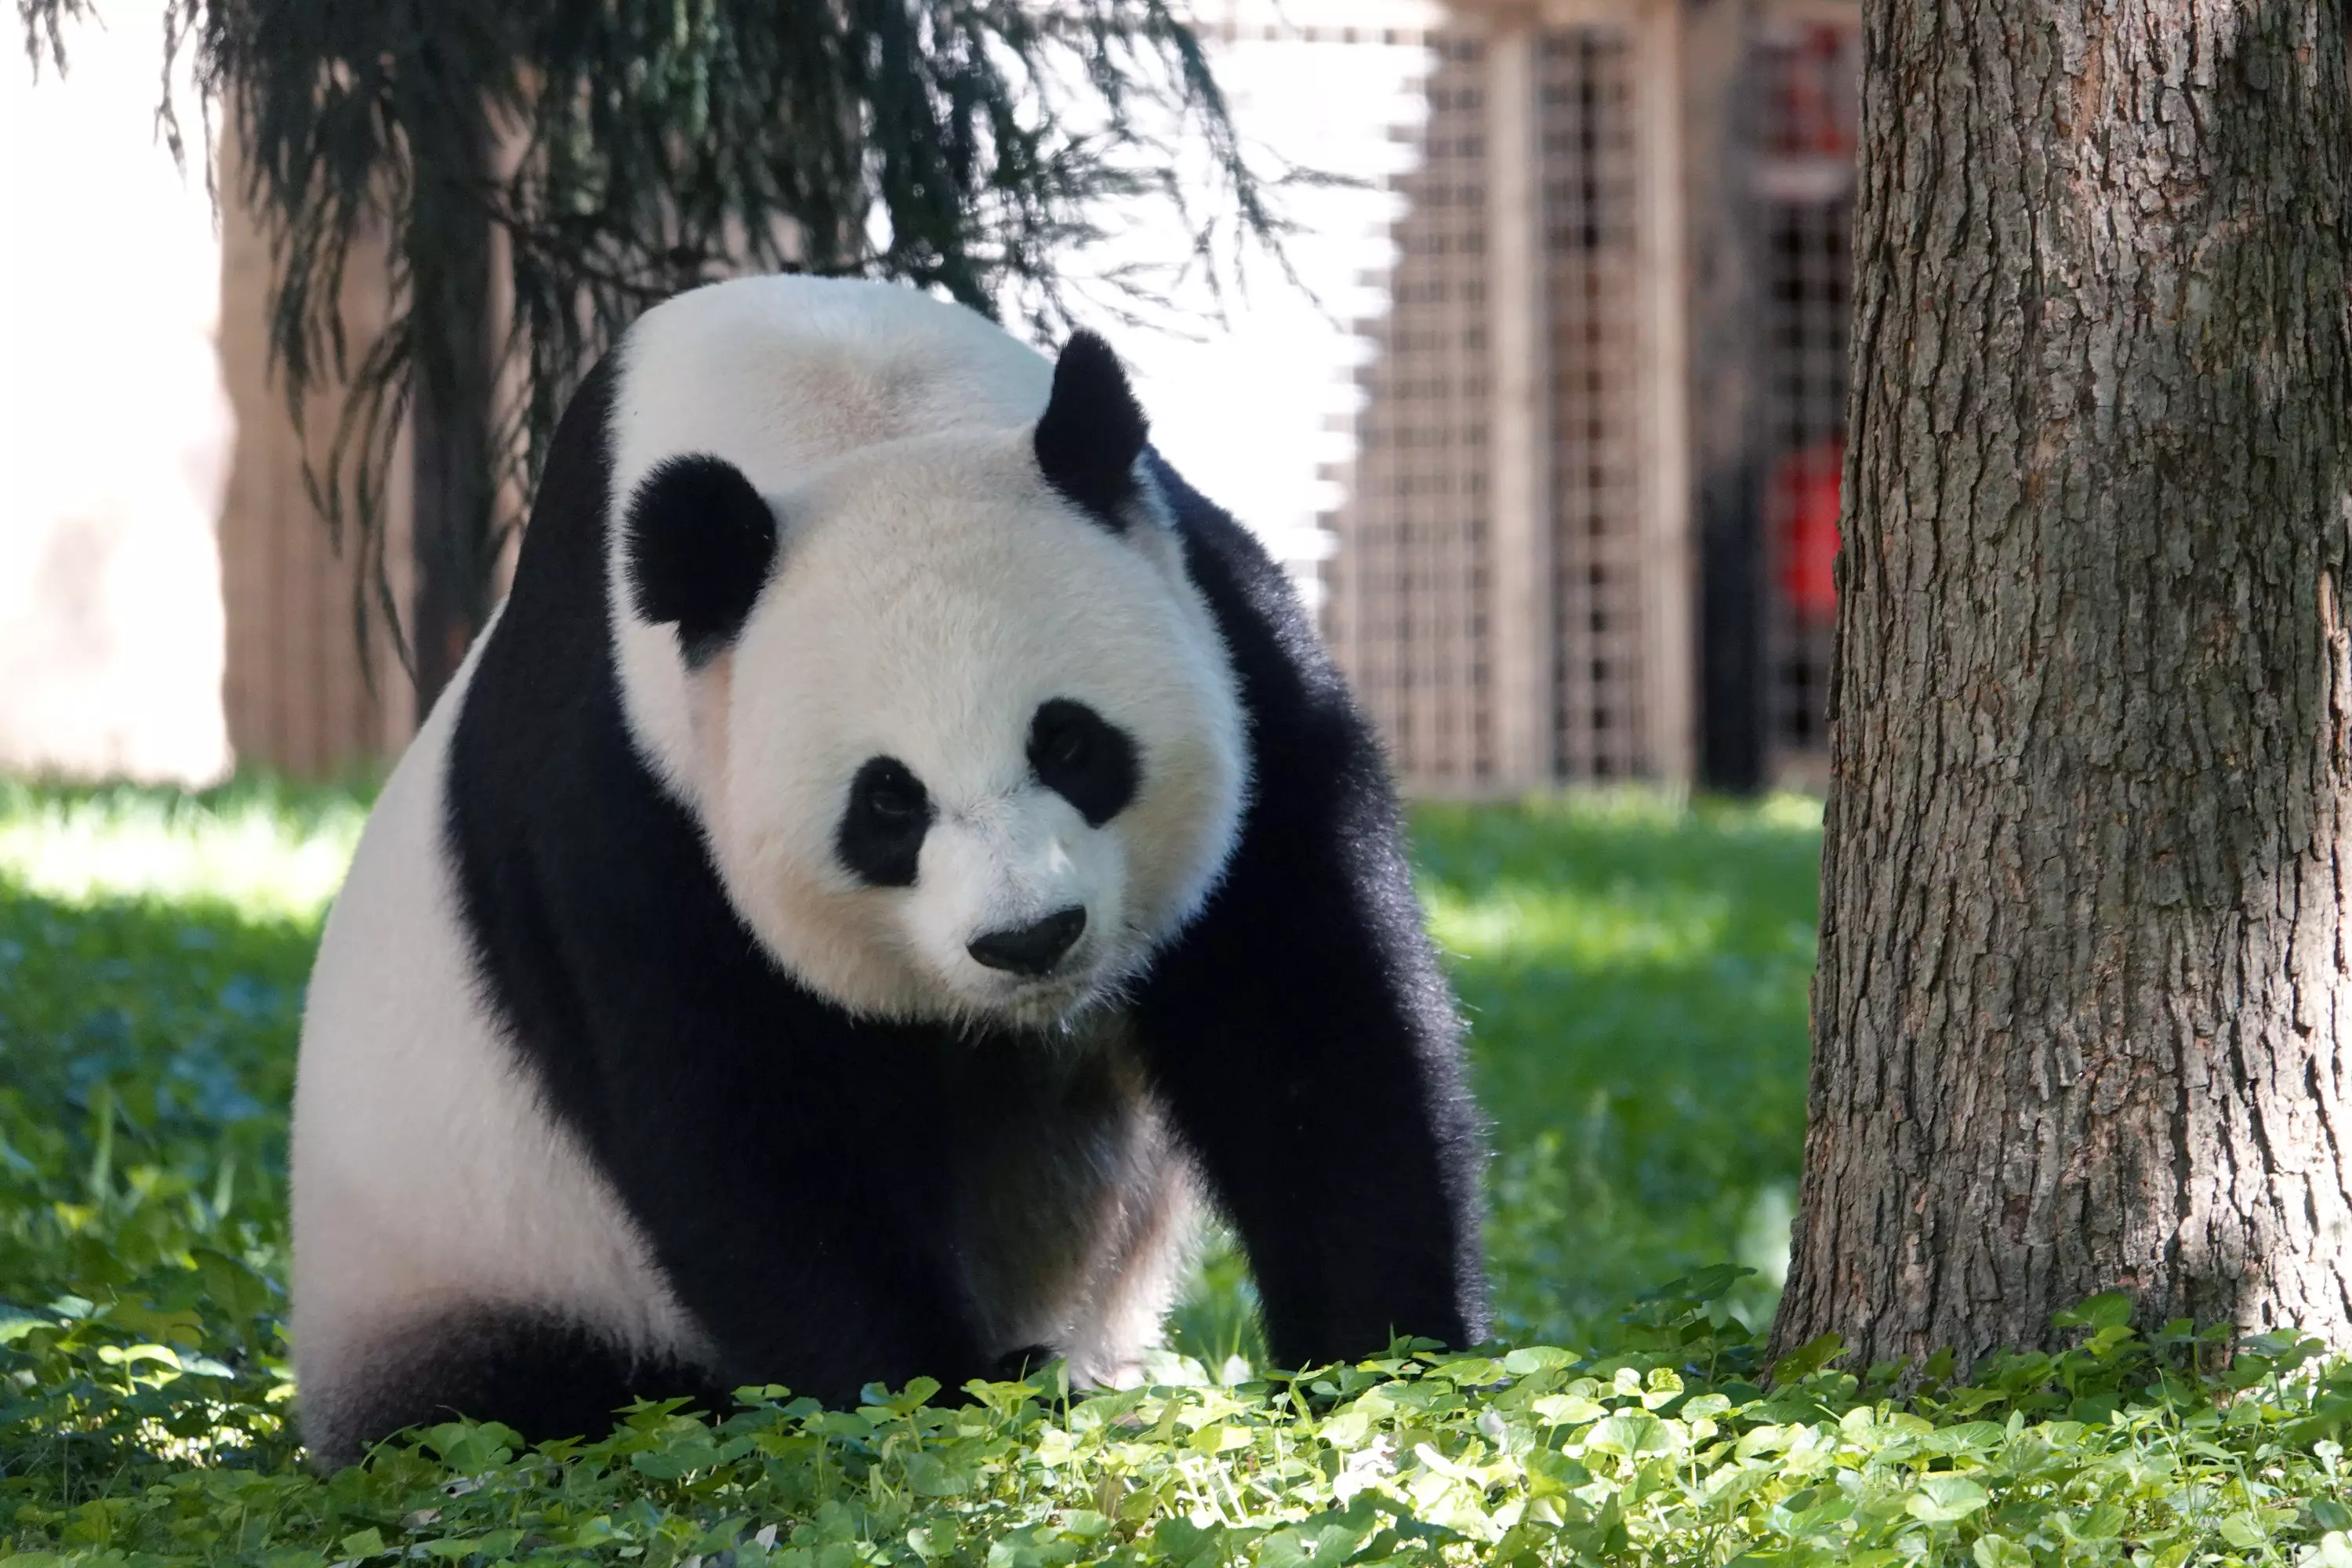 The number of giant pandas in the wild now stands at 1,800 (